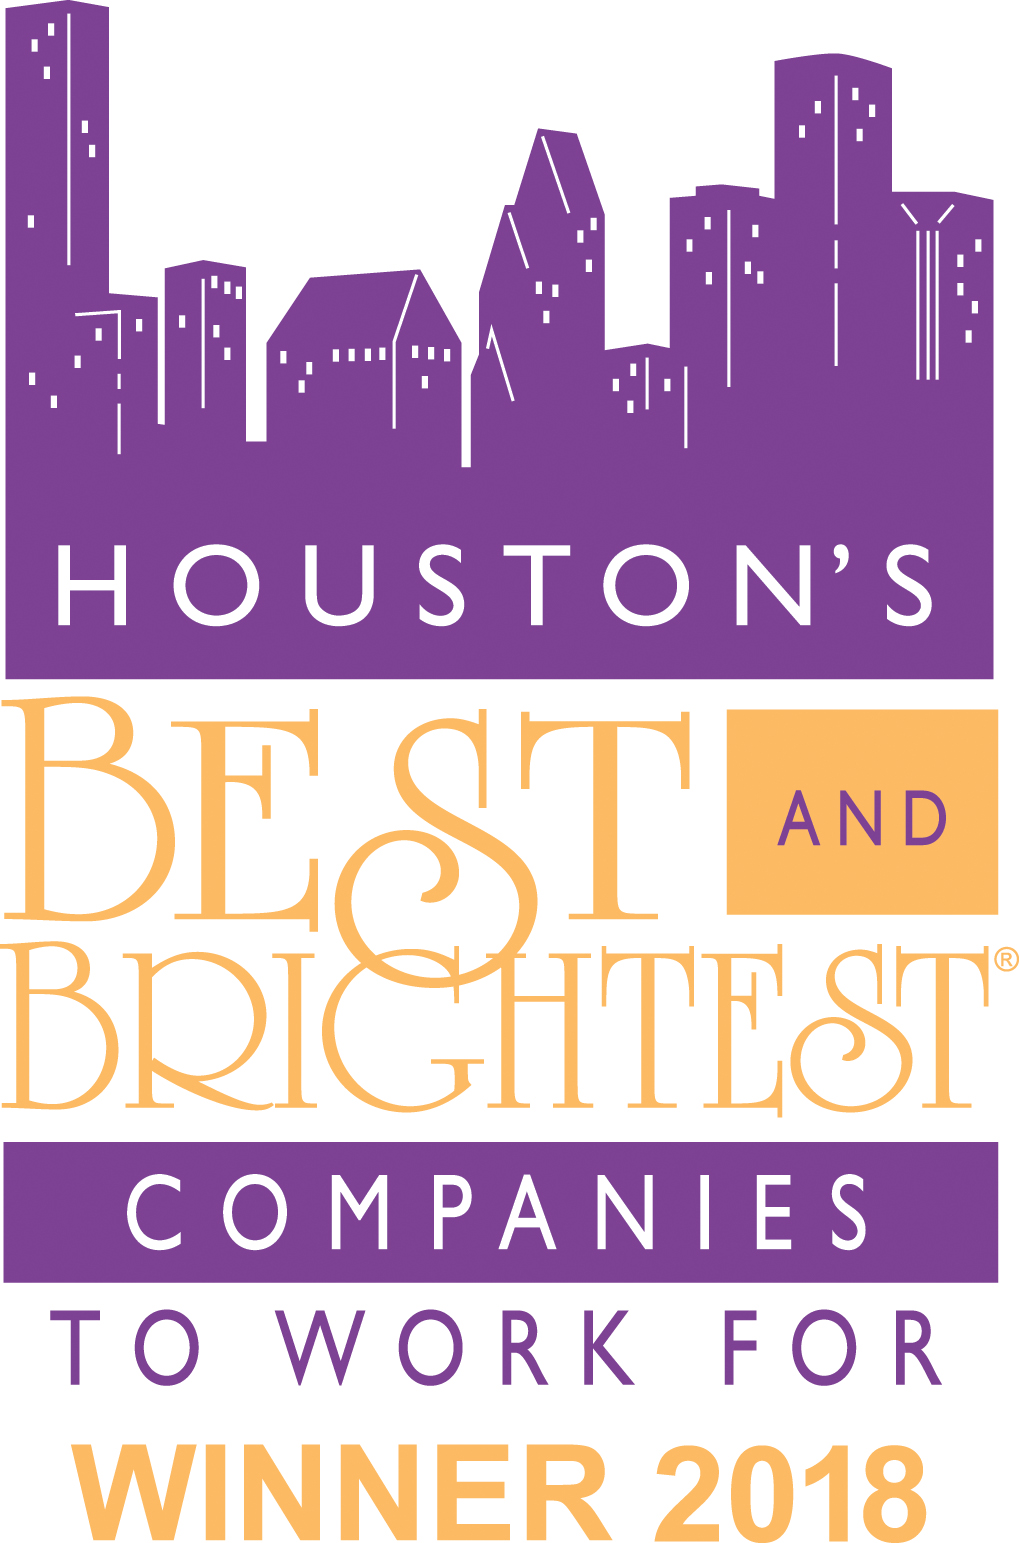 Houston's best and brightest companies to work for 2018 winner.